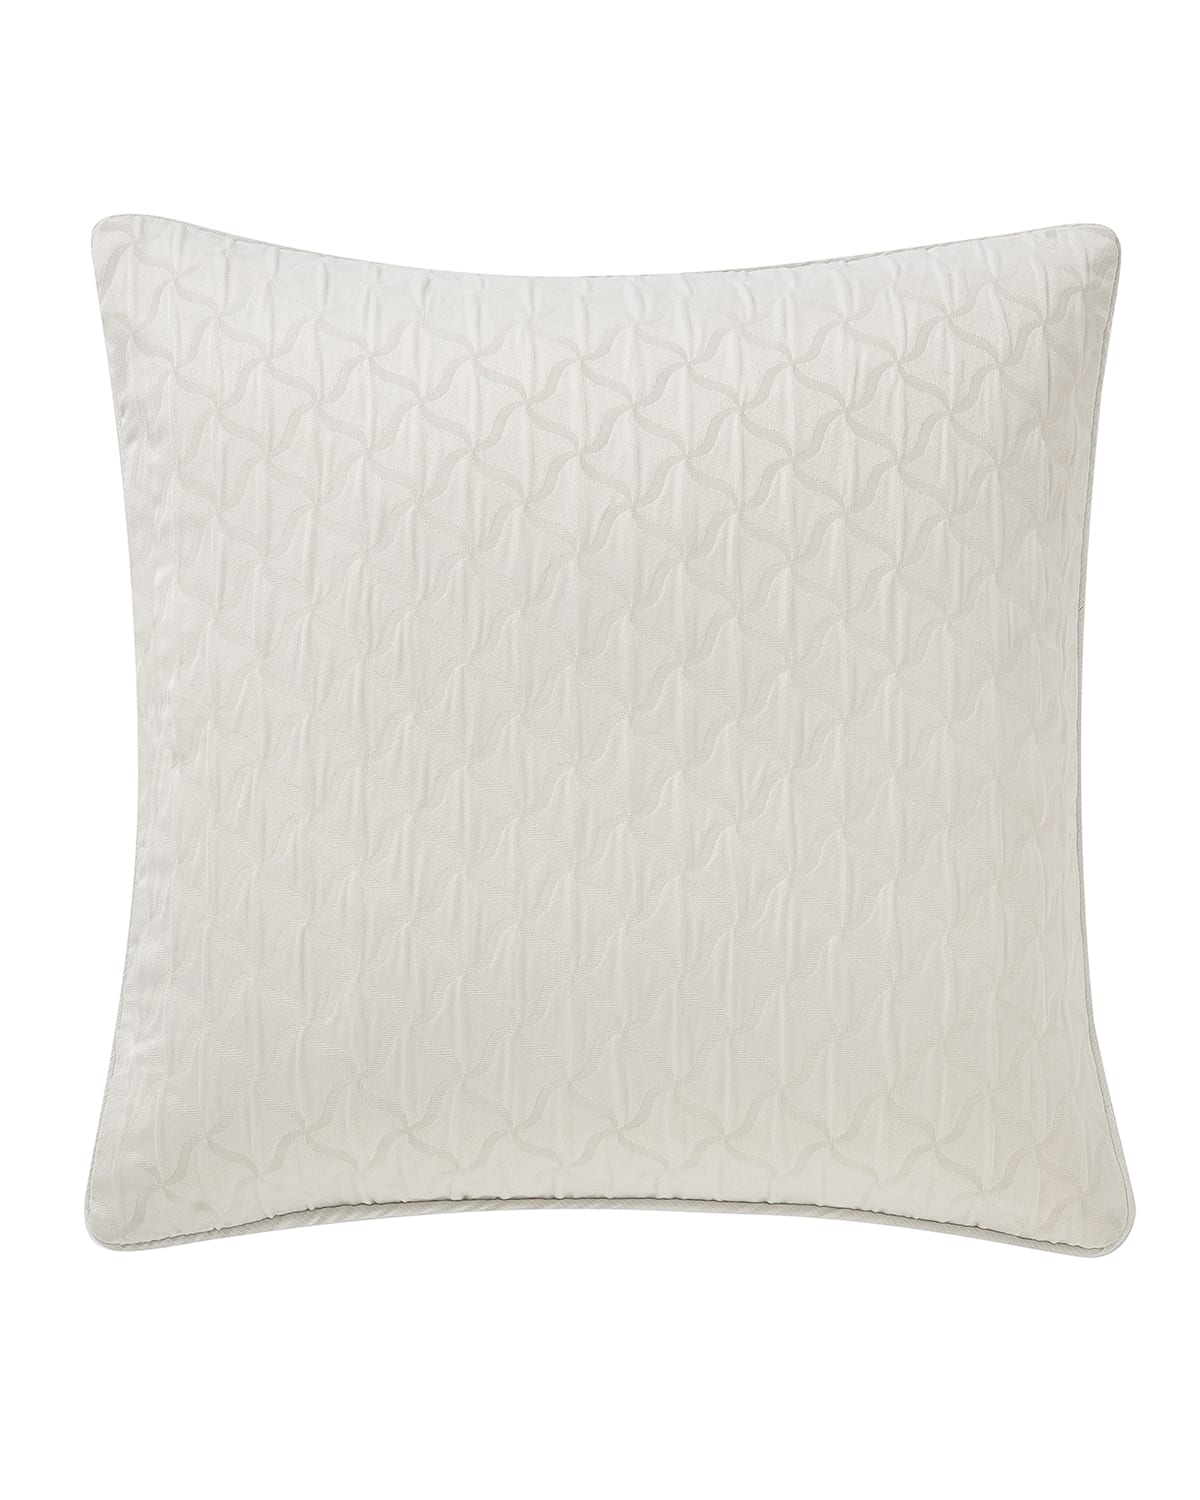 Image Waterford Celine Square Decorative Pillow, 18"Sq.